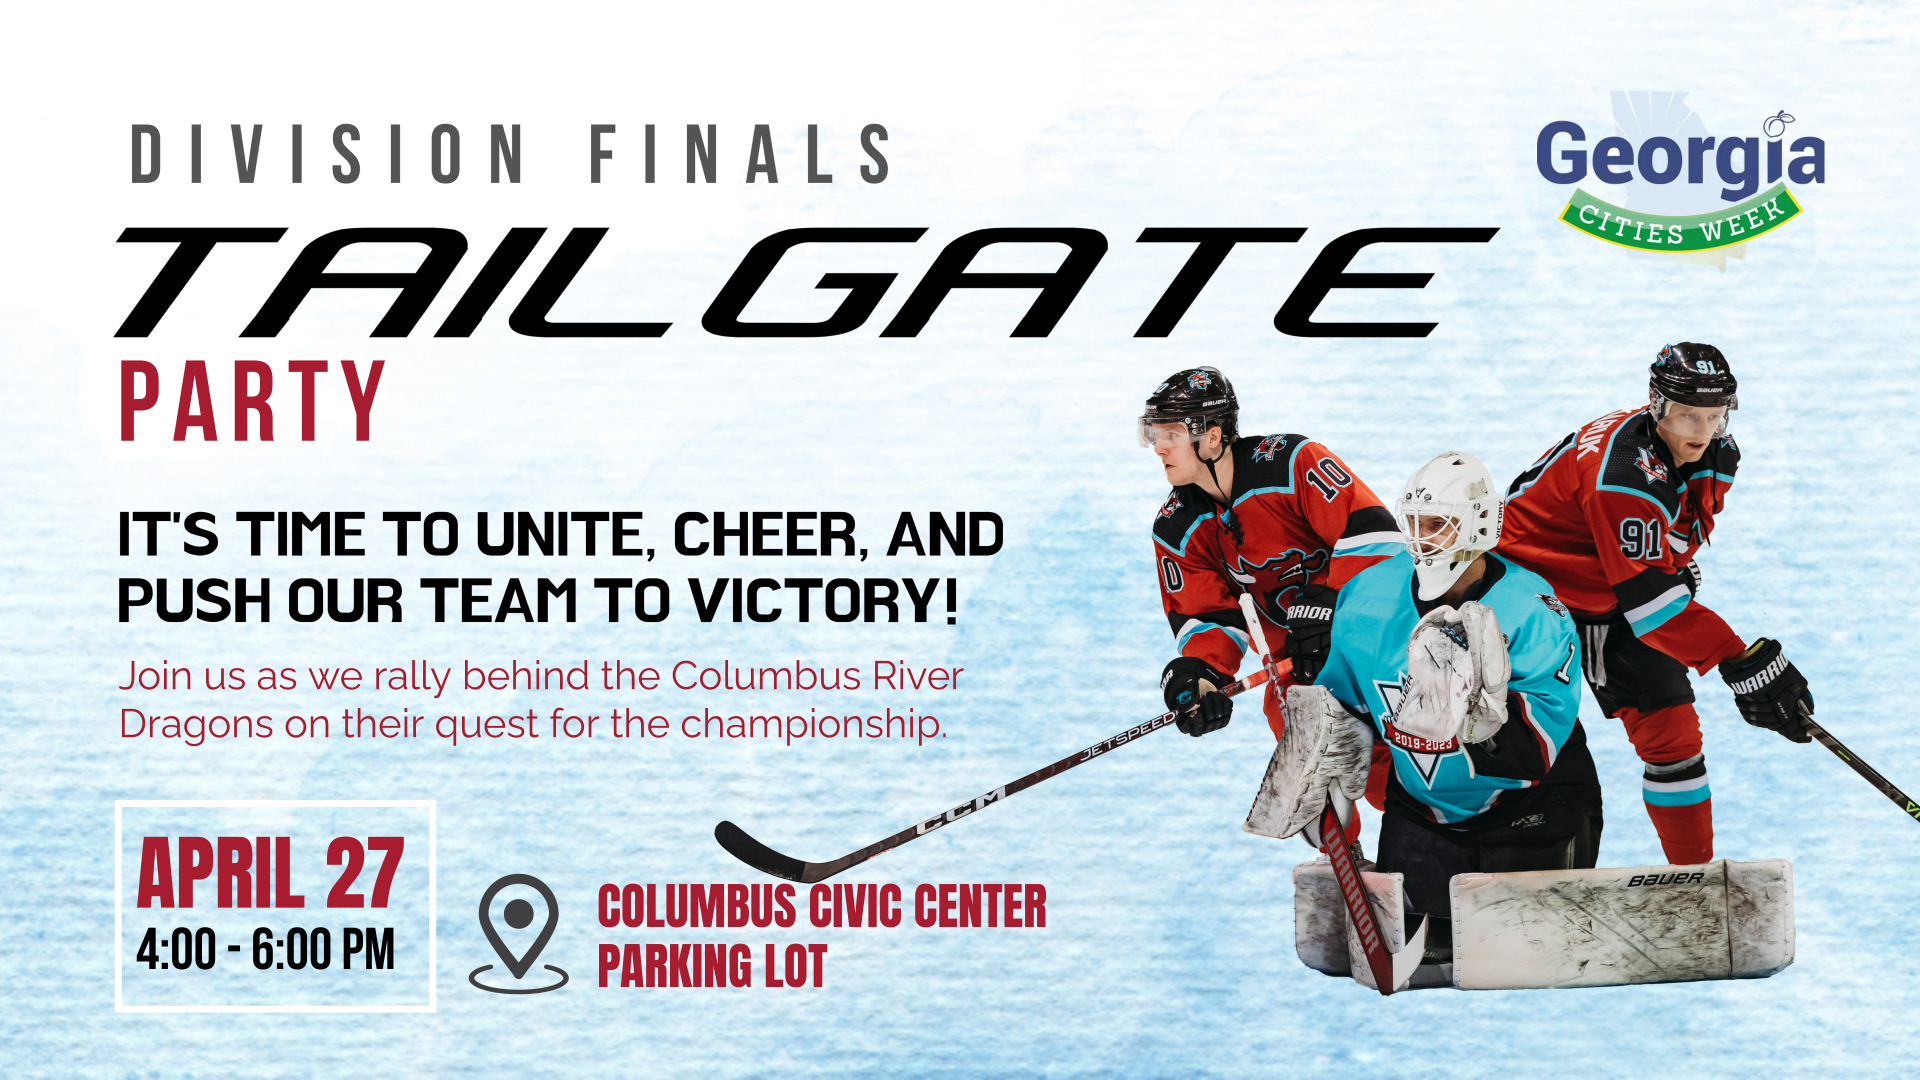 Division Finals Tailgate Party, April 27th 4:00 to 6:00 PM at the Columbus Civic Center Parking Lot